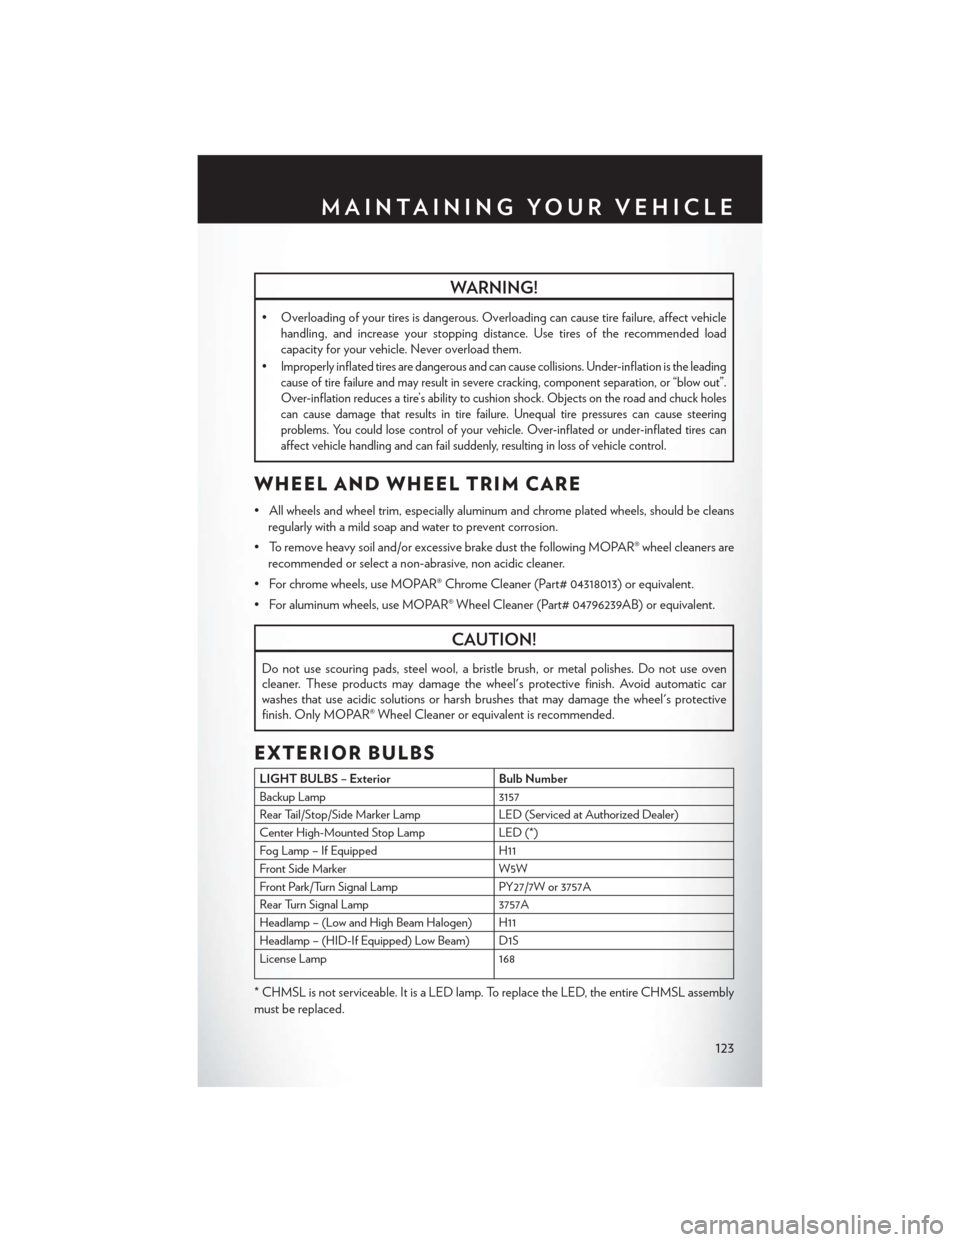 CHRYSLER TOWN AND COUNTRY 2013 5.G User Guide WARNING!
• Overloading of your tires is dangerous. Overloading can cause tire failure, affect vehiclehandling, and increase your stopping distance. Use tires of the recommended load
capacity for you